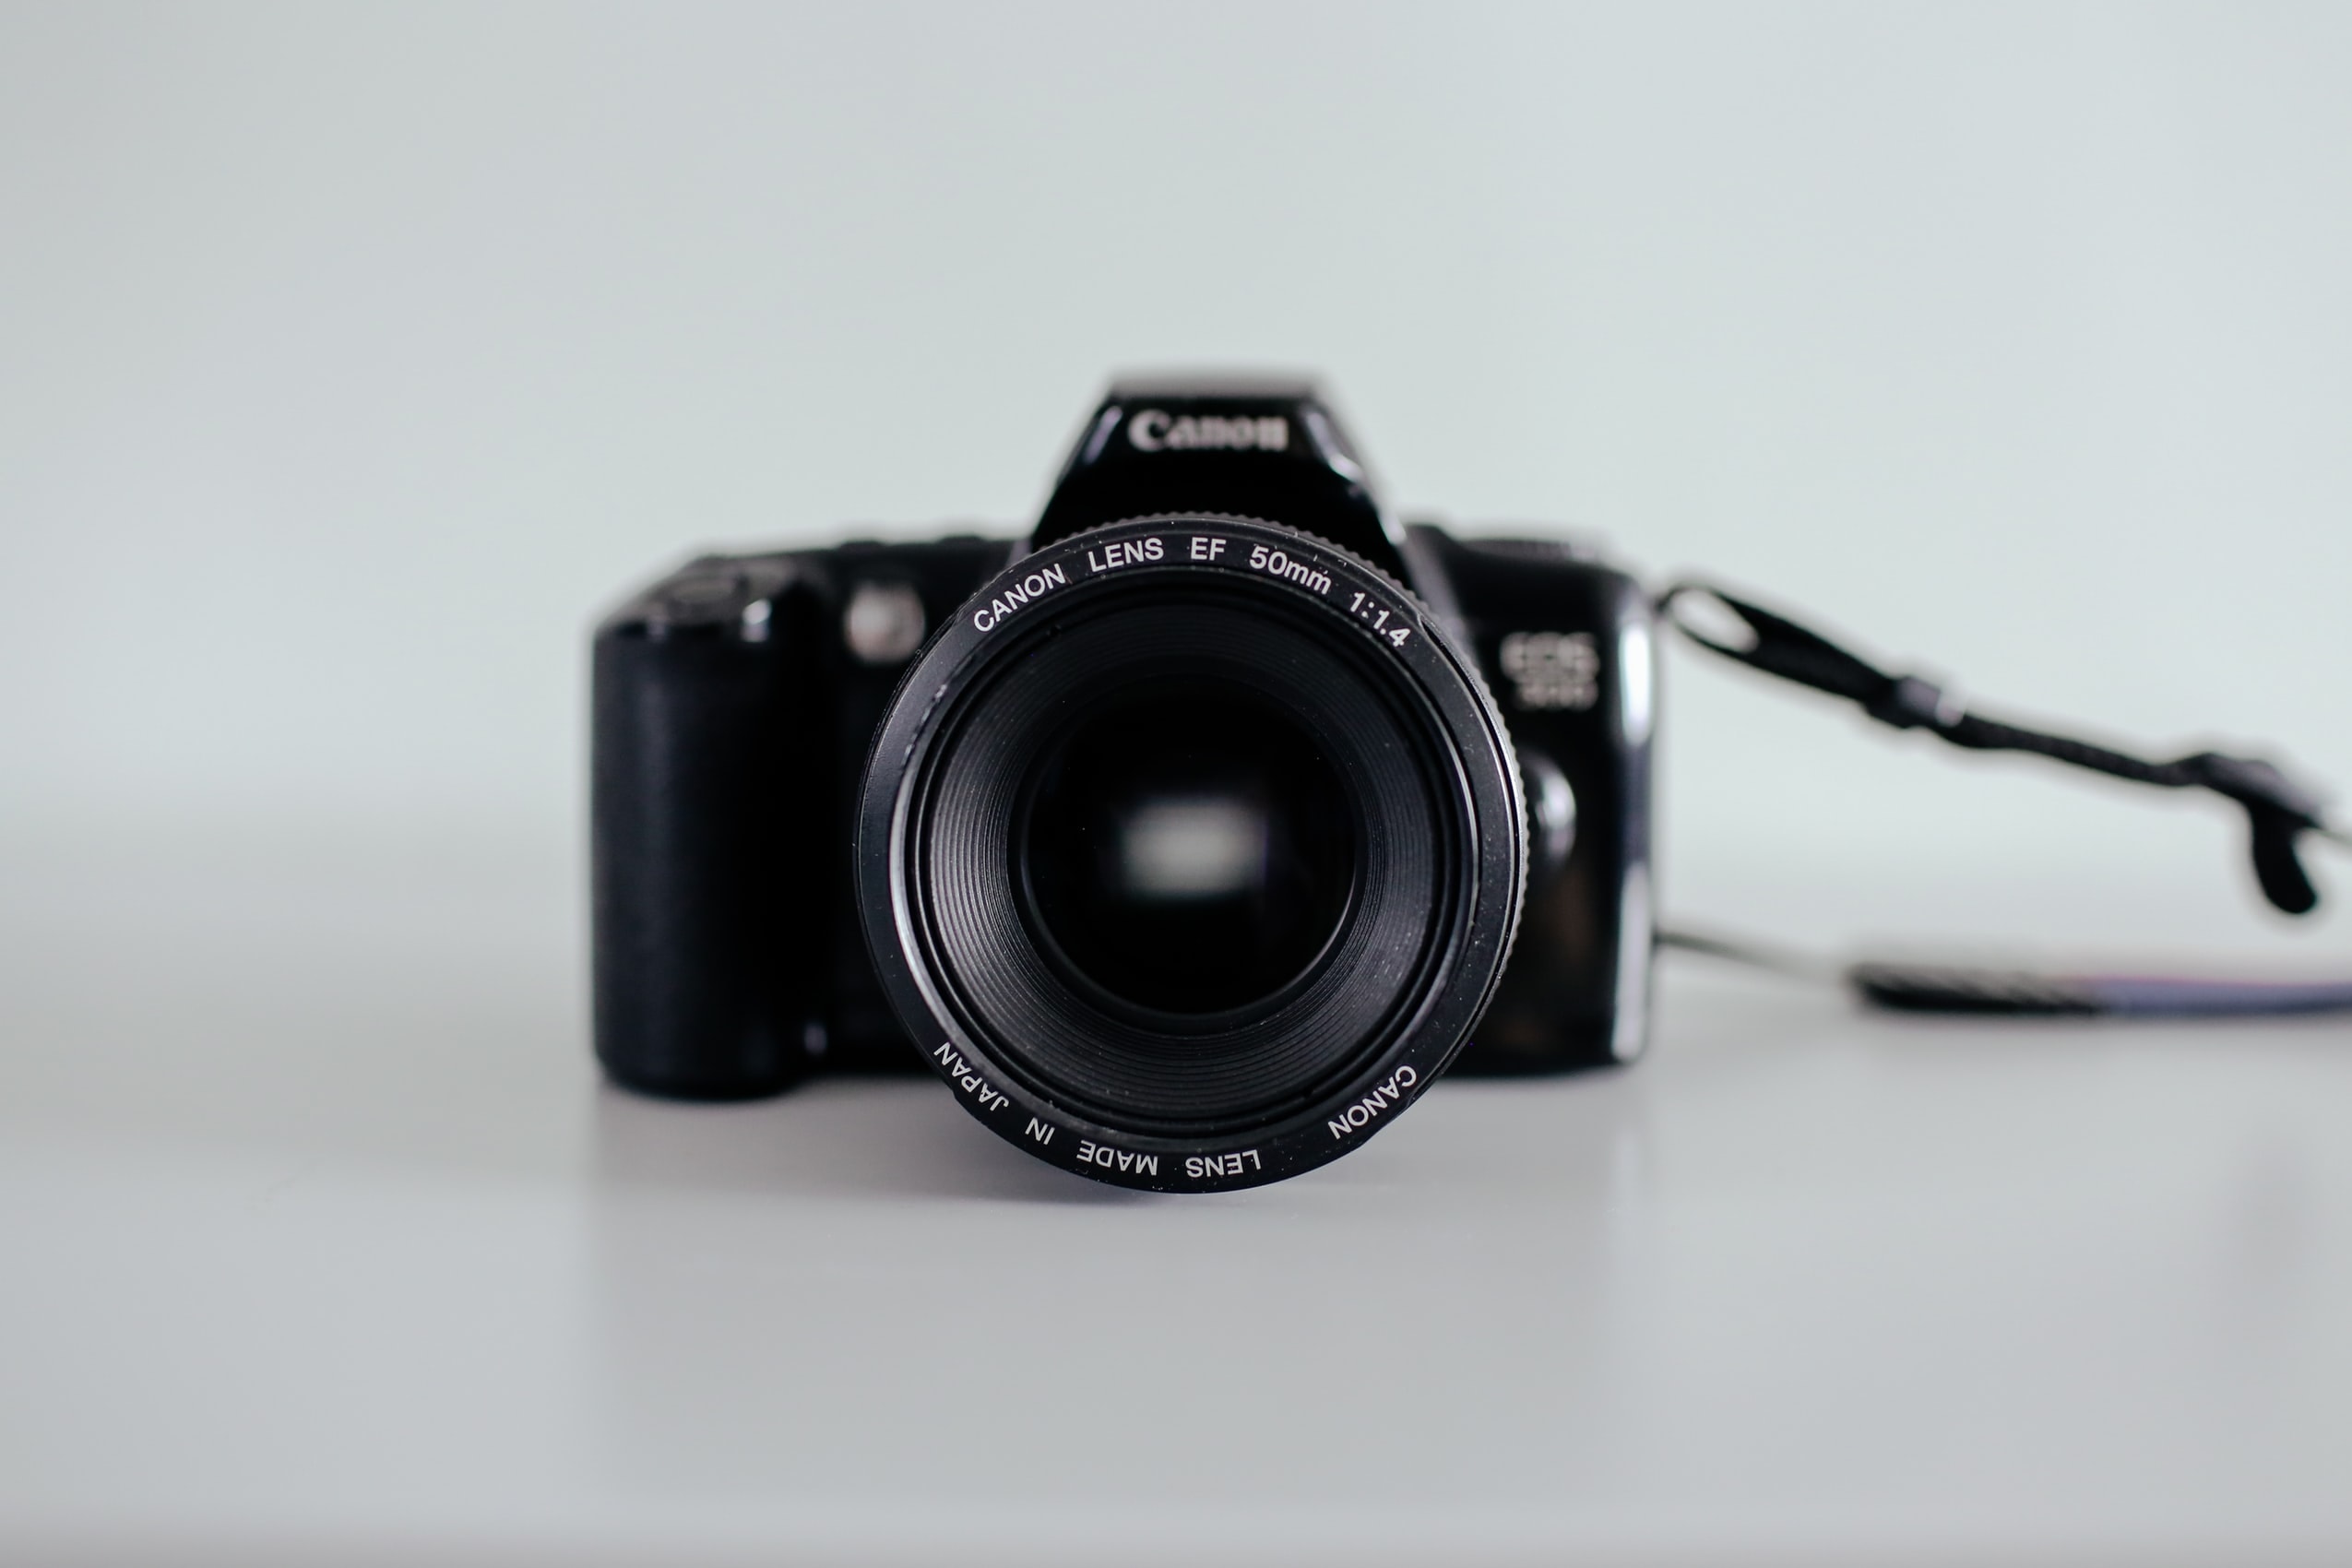 10 Best Budget Cameras For Filmmaking in 2019 - An image of a Canon DSLR camera